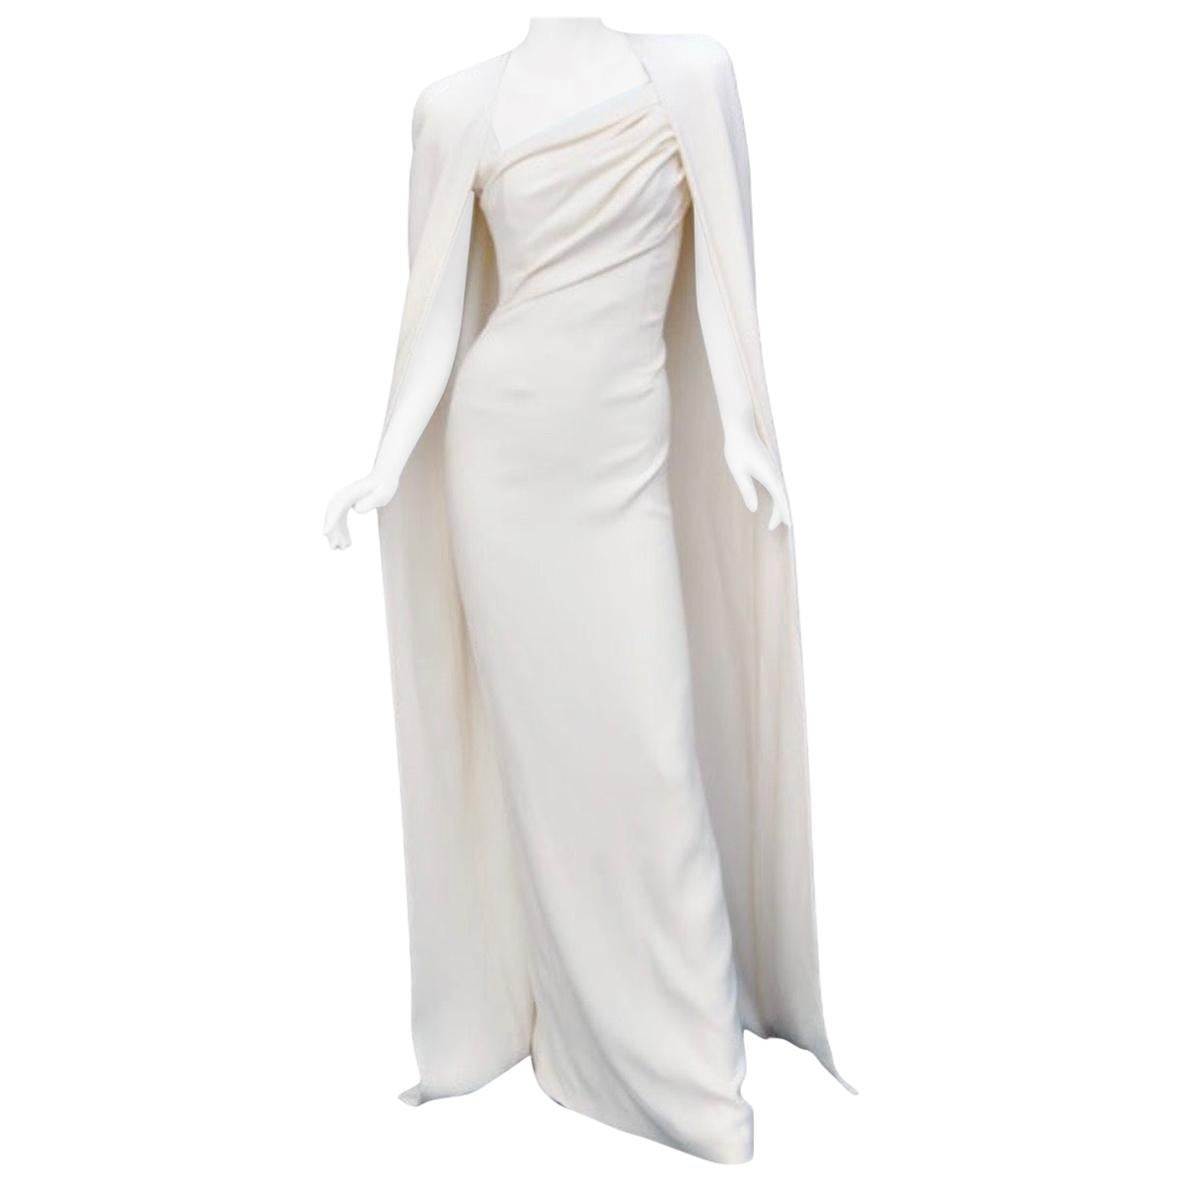 TOM FORD CHALK DOUBLE GEORGETTE STRETCH EVENING CAPE DRESS sz 38